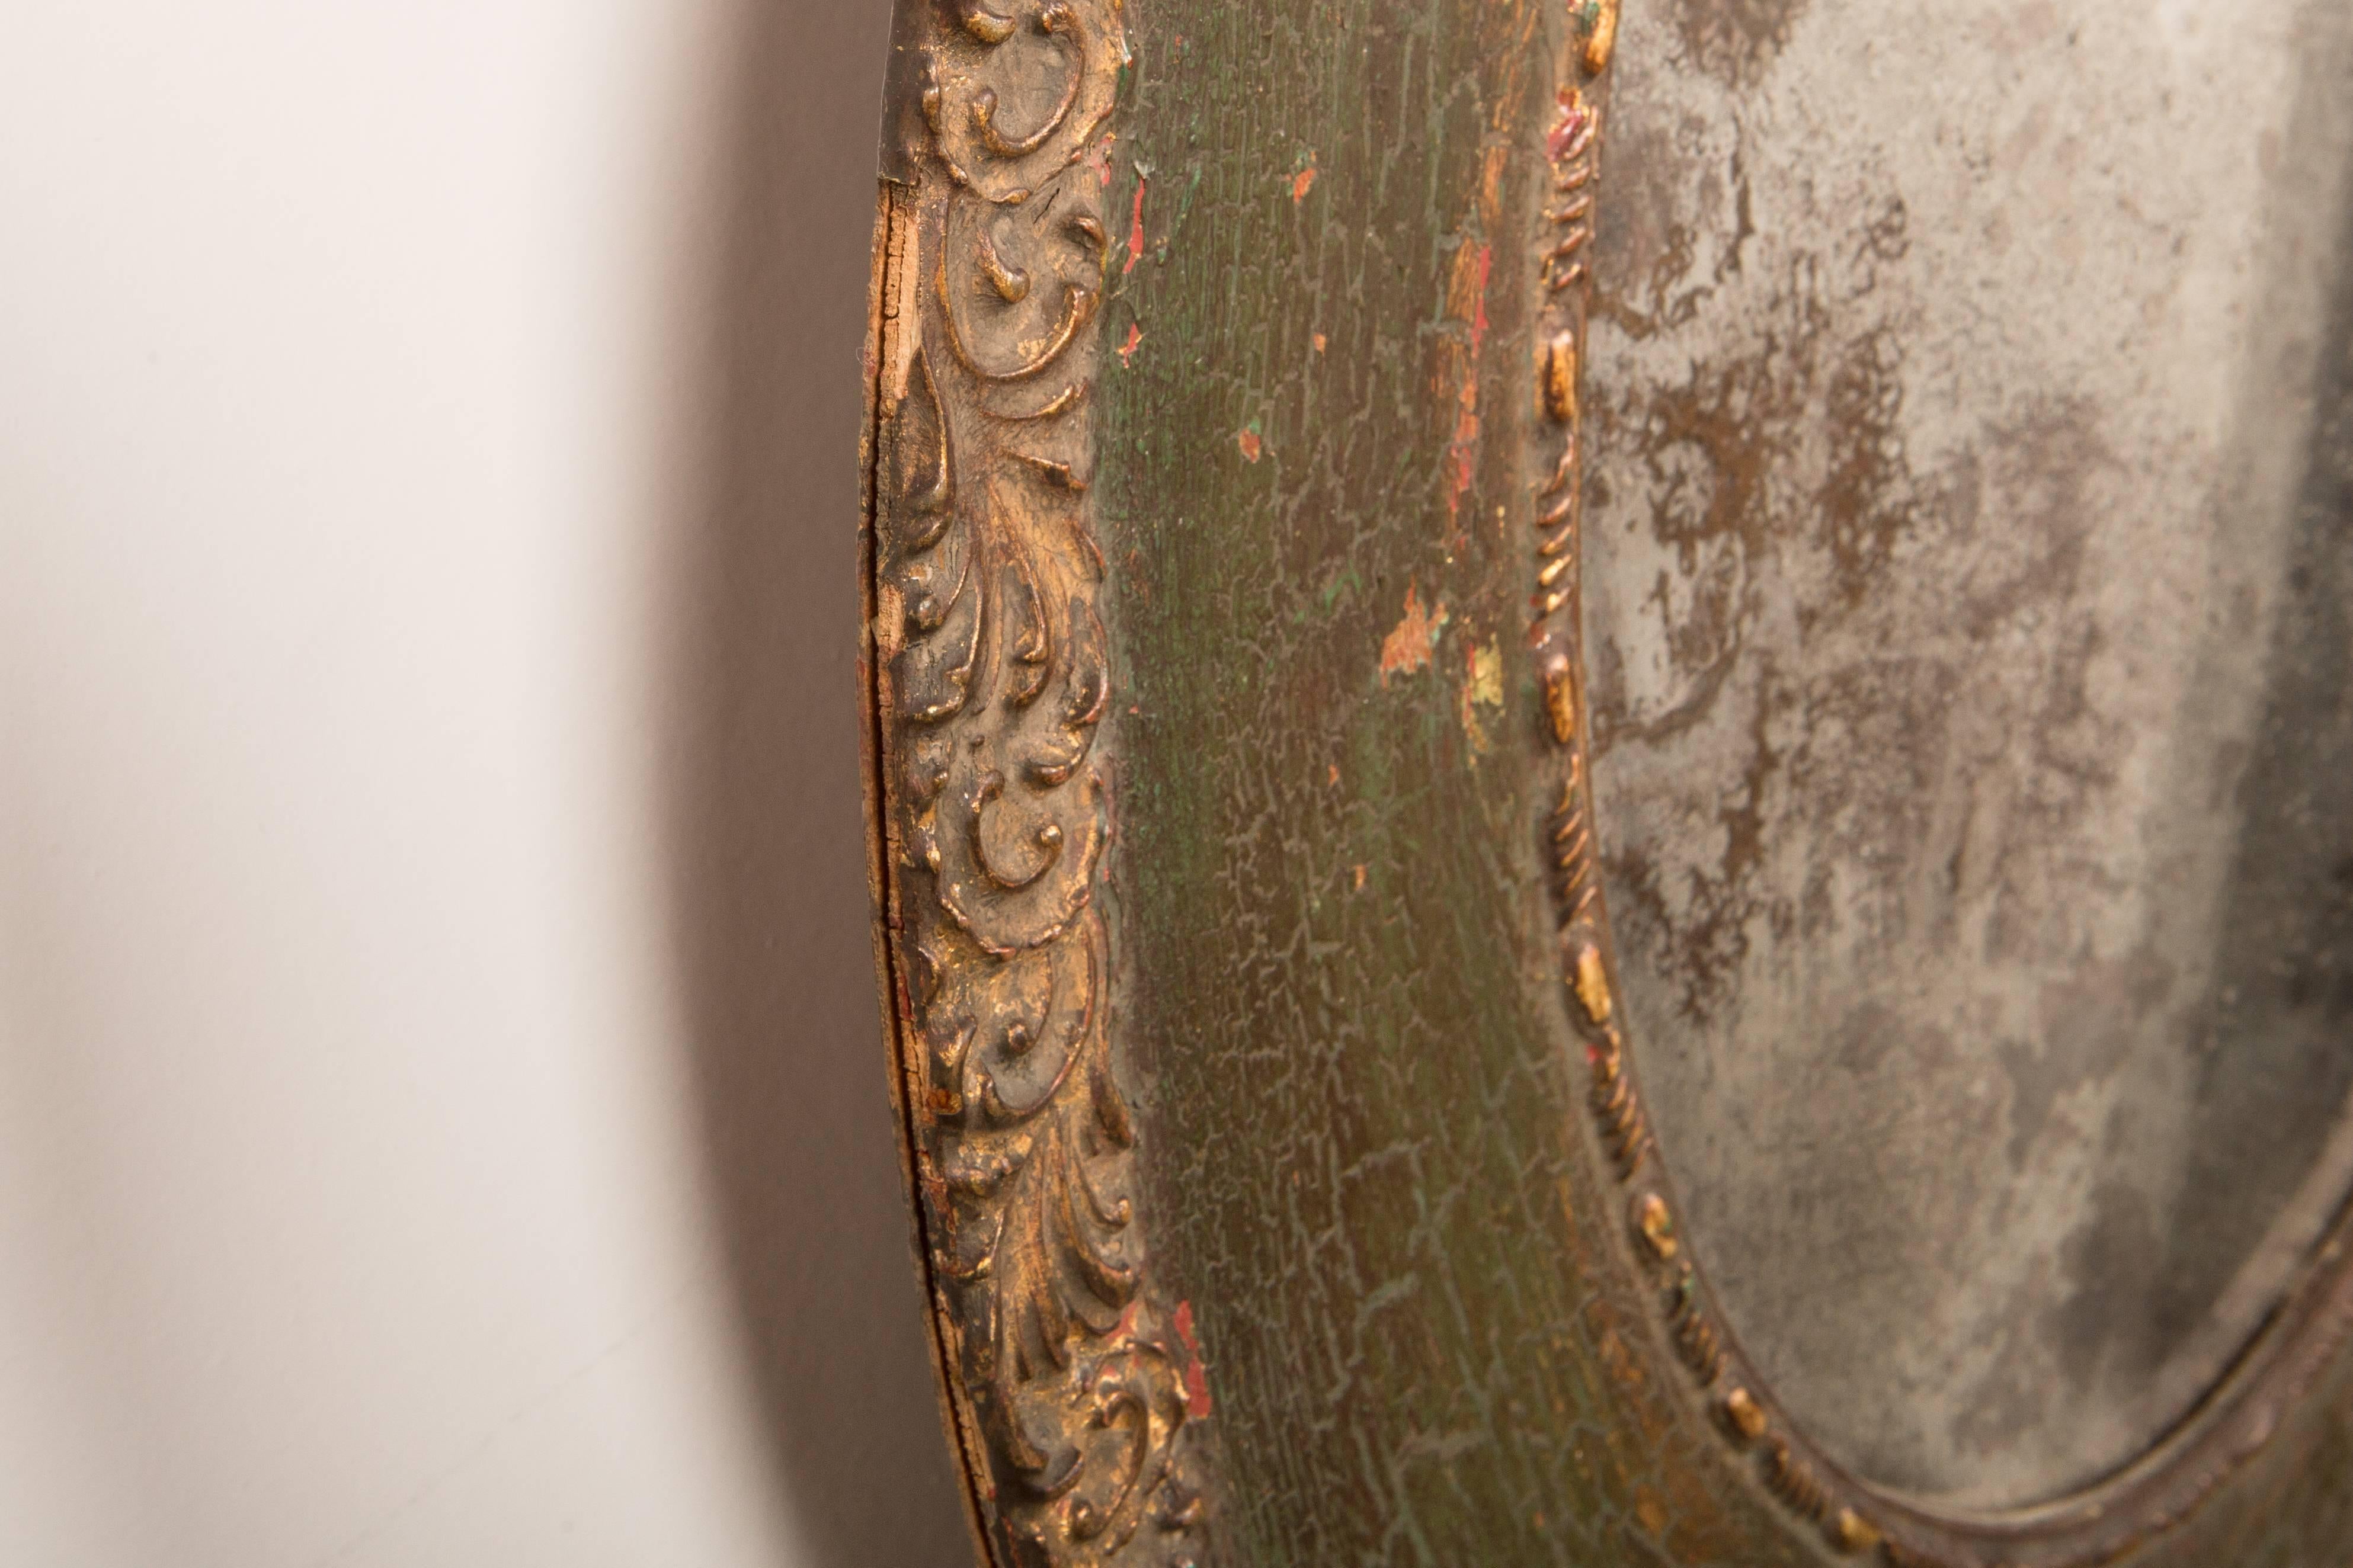 Pair of gorgeous 19th-Century antique oval mirrors with unbelievably beautiful patination to the original mirror. Faded gilt on the edge carving detail, and a wonderful shade of deep green. Some losses and chipping throughout. These mirrors have age